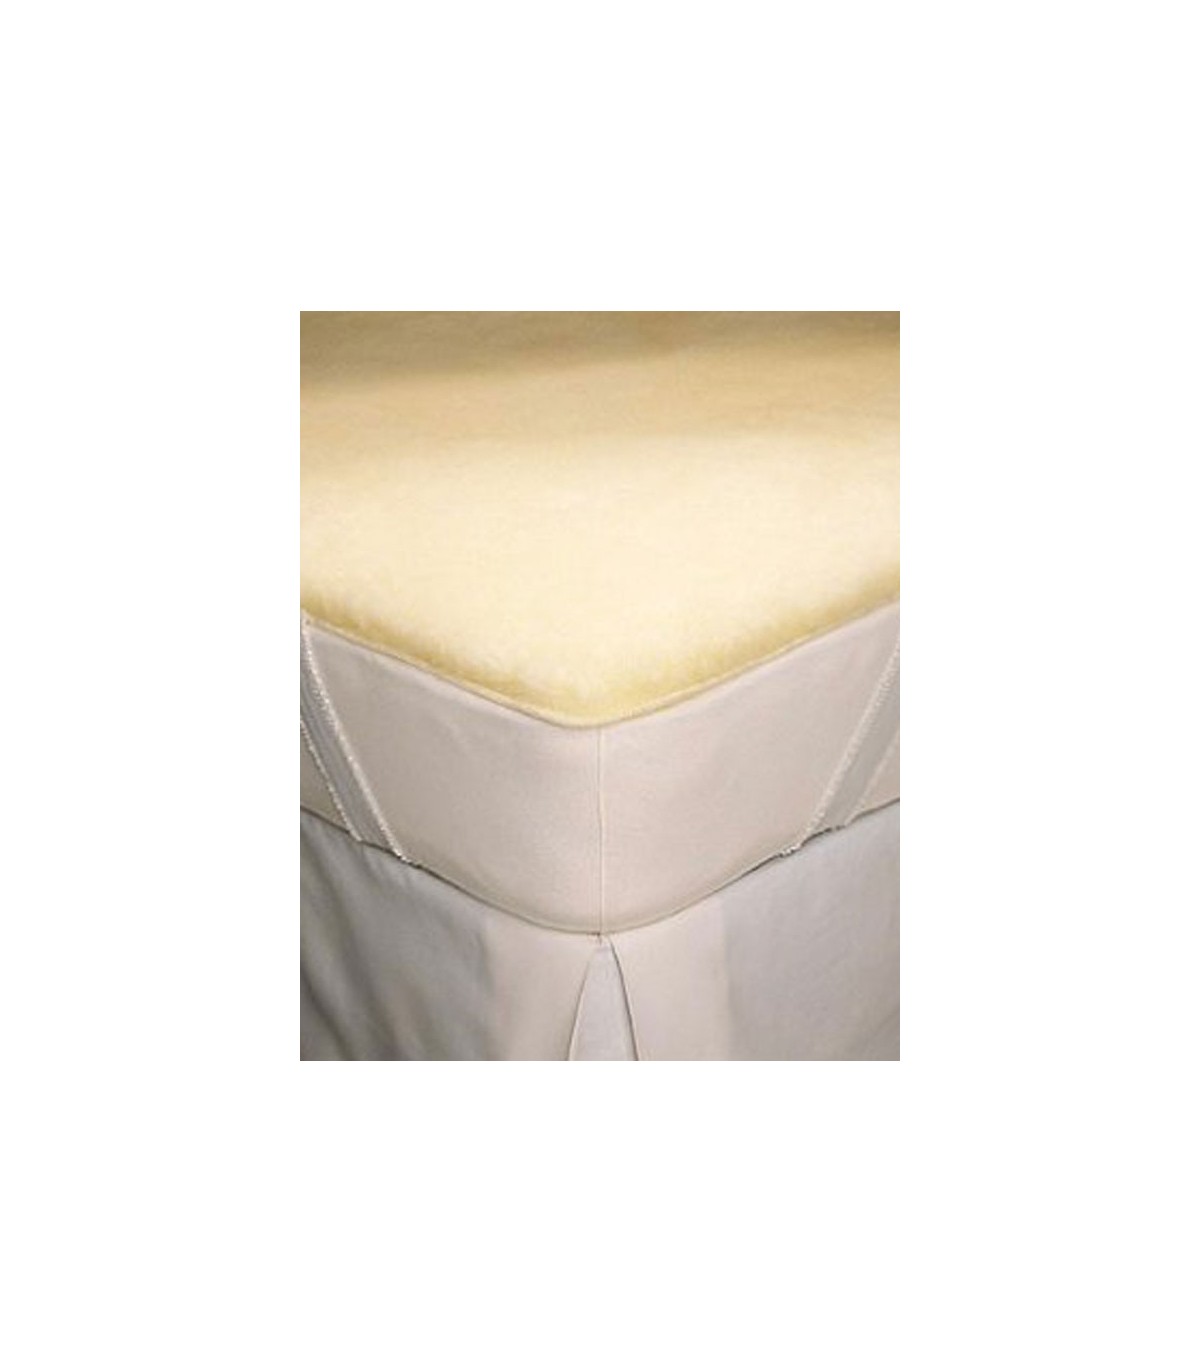 New Luxury Double Lambswool Fluffy Fleece Mattress Topper Thermal Insulated 